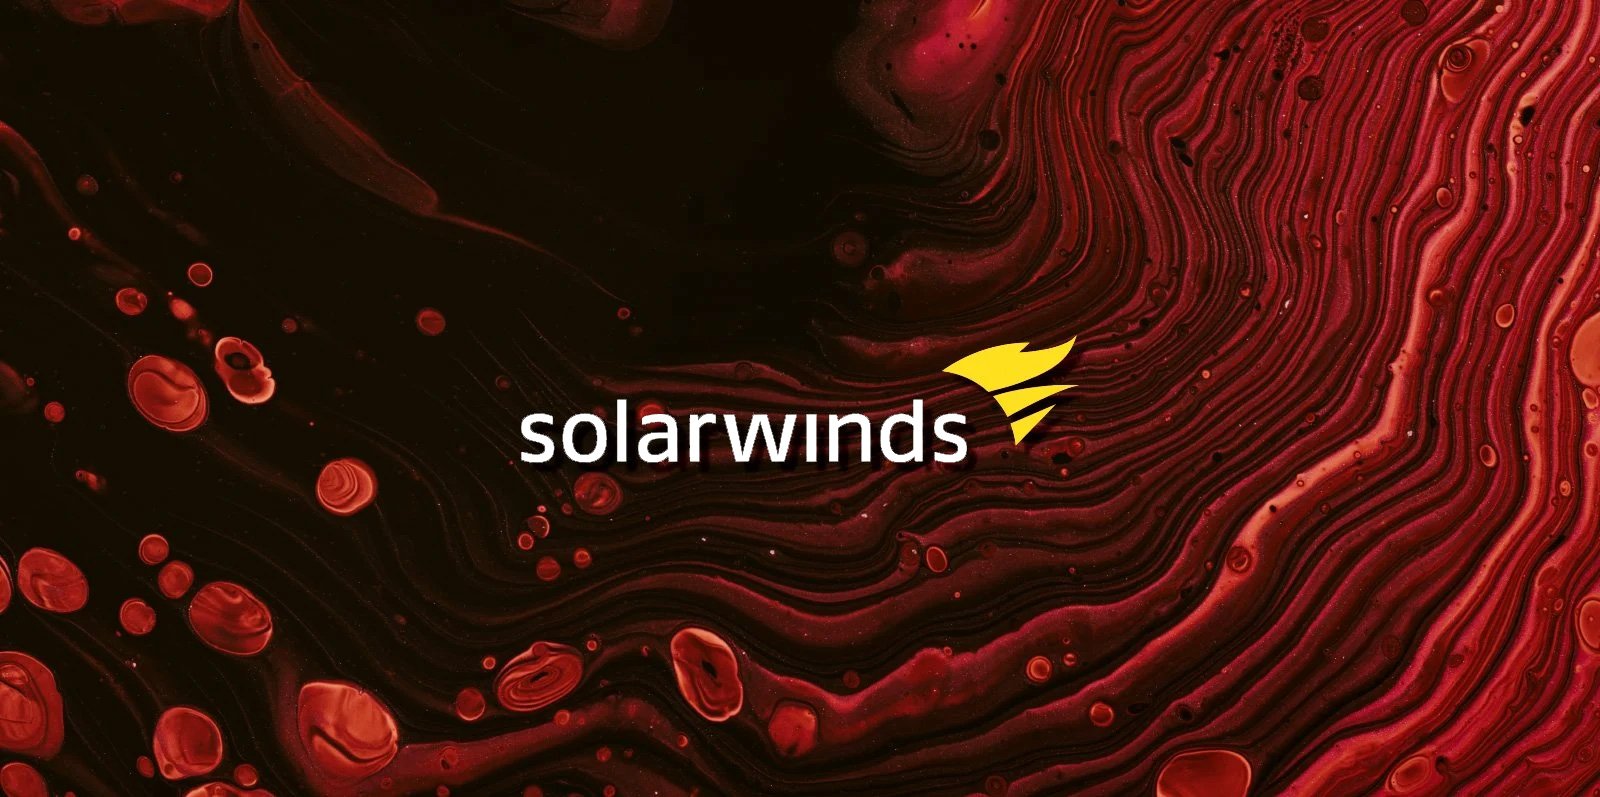 US federal payroll agency hacked using SolarWinds software flaw